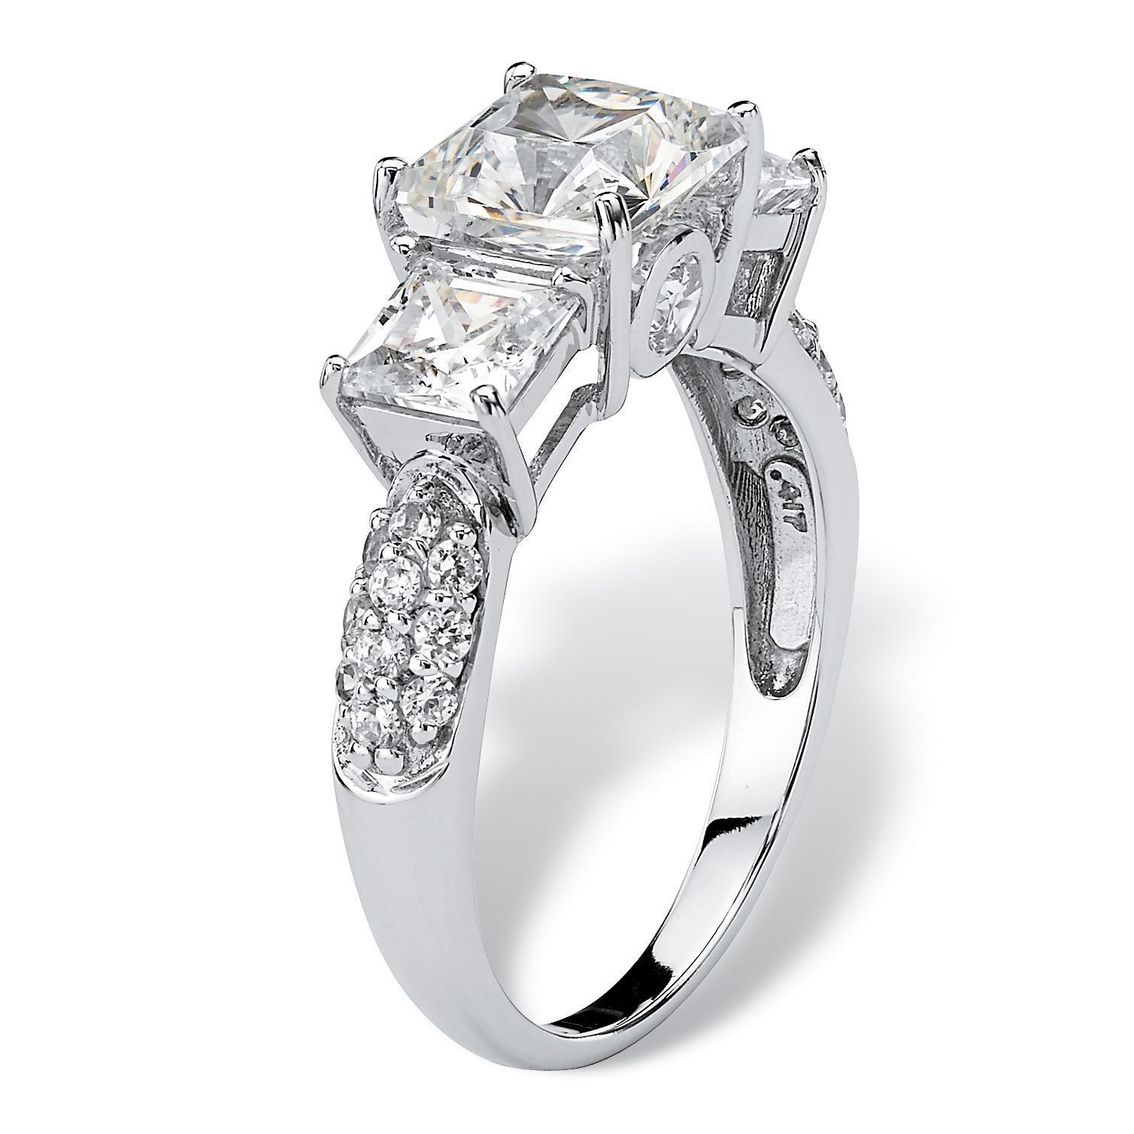 PalmBeach 3.06 TCW Princess-Cut Cubic Zirconia Ring in Solid 10k White Gold - Image 2 of 5